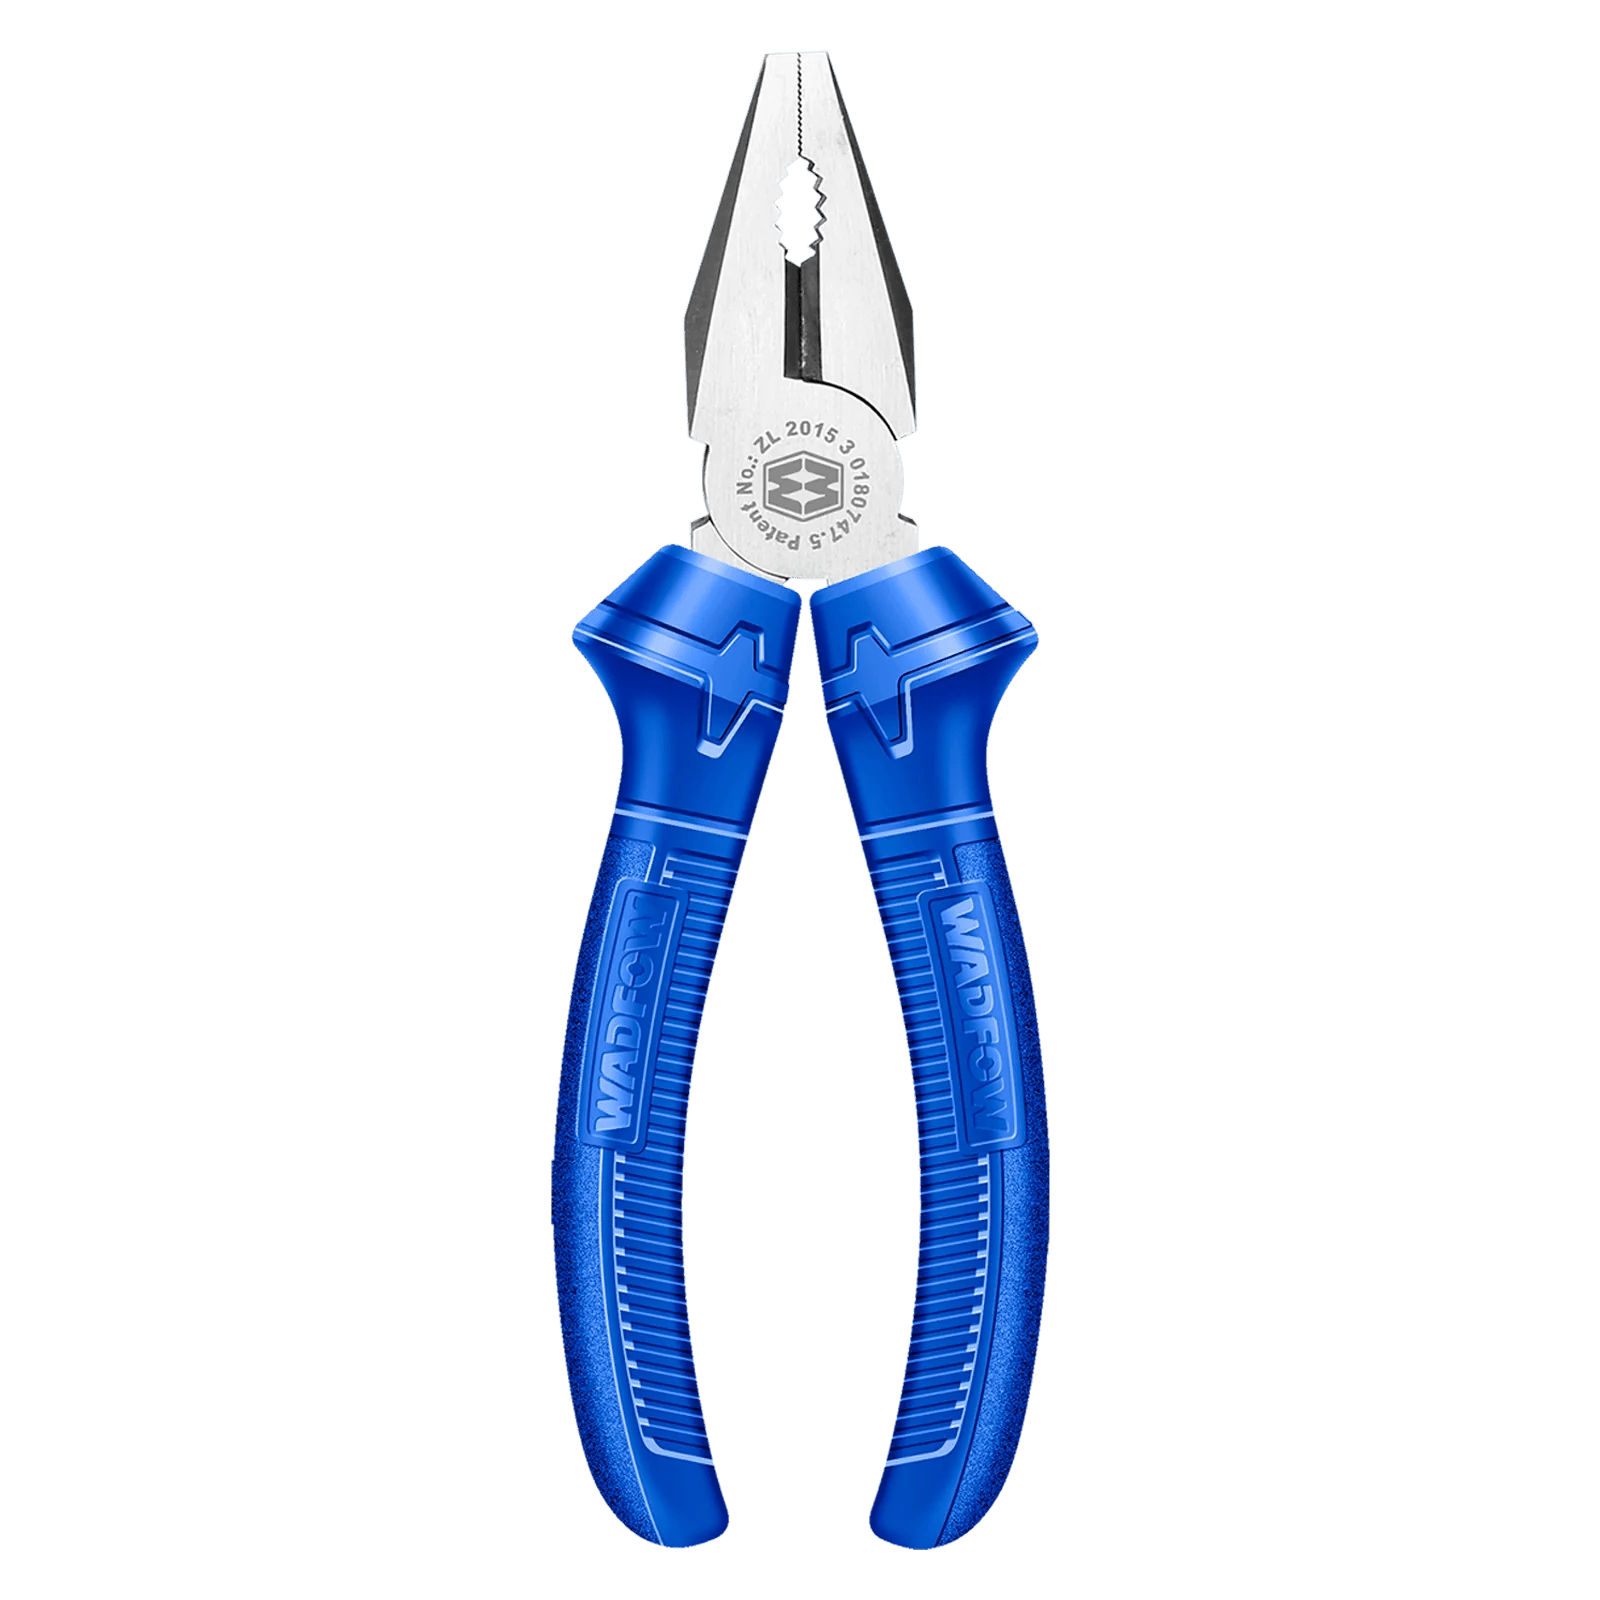 Total Combination Plier 6", 7" & 8" - THT110612, THT110712 & THT110812 | Supply Master | Accra, Ghana Pliers Buy Tools hardware Building materials